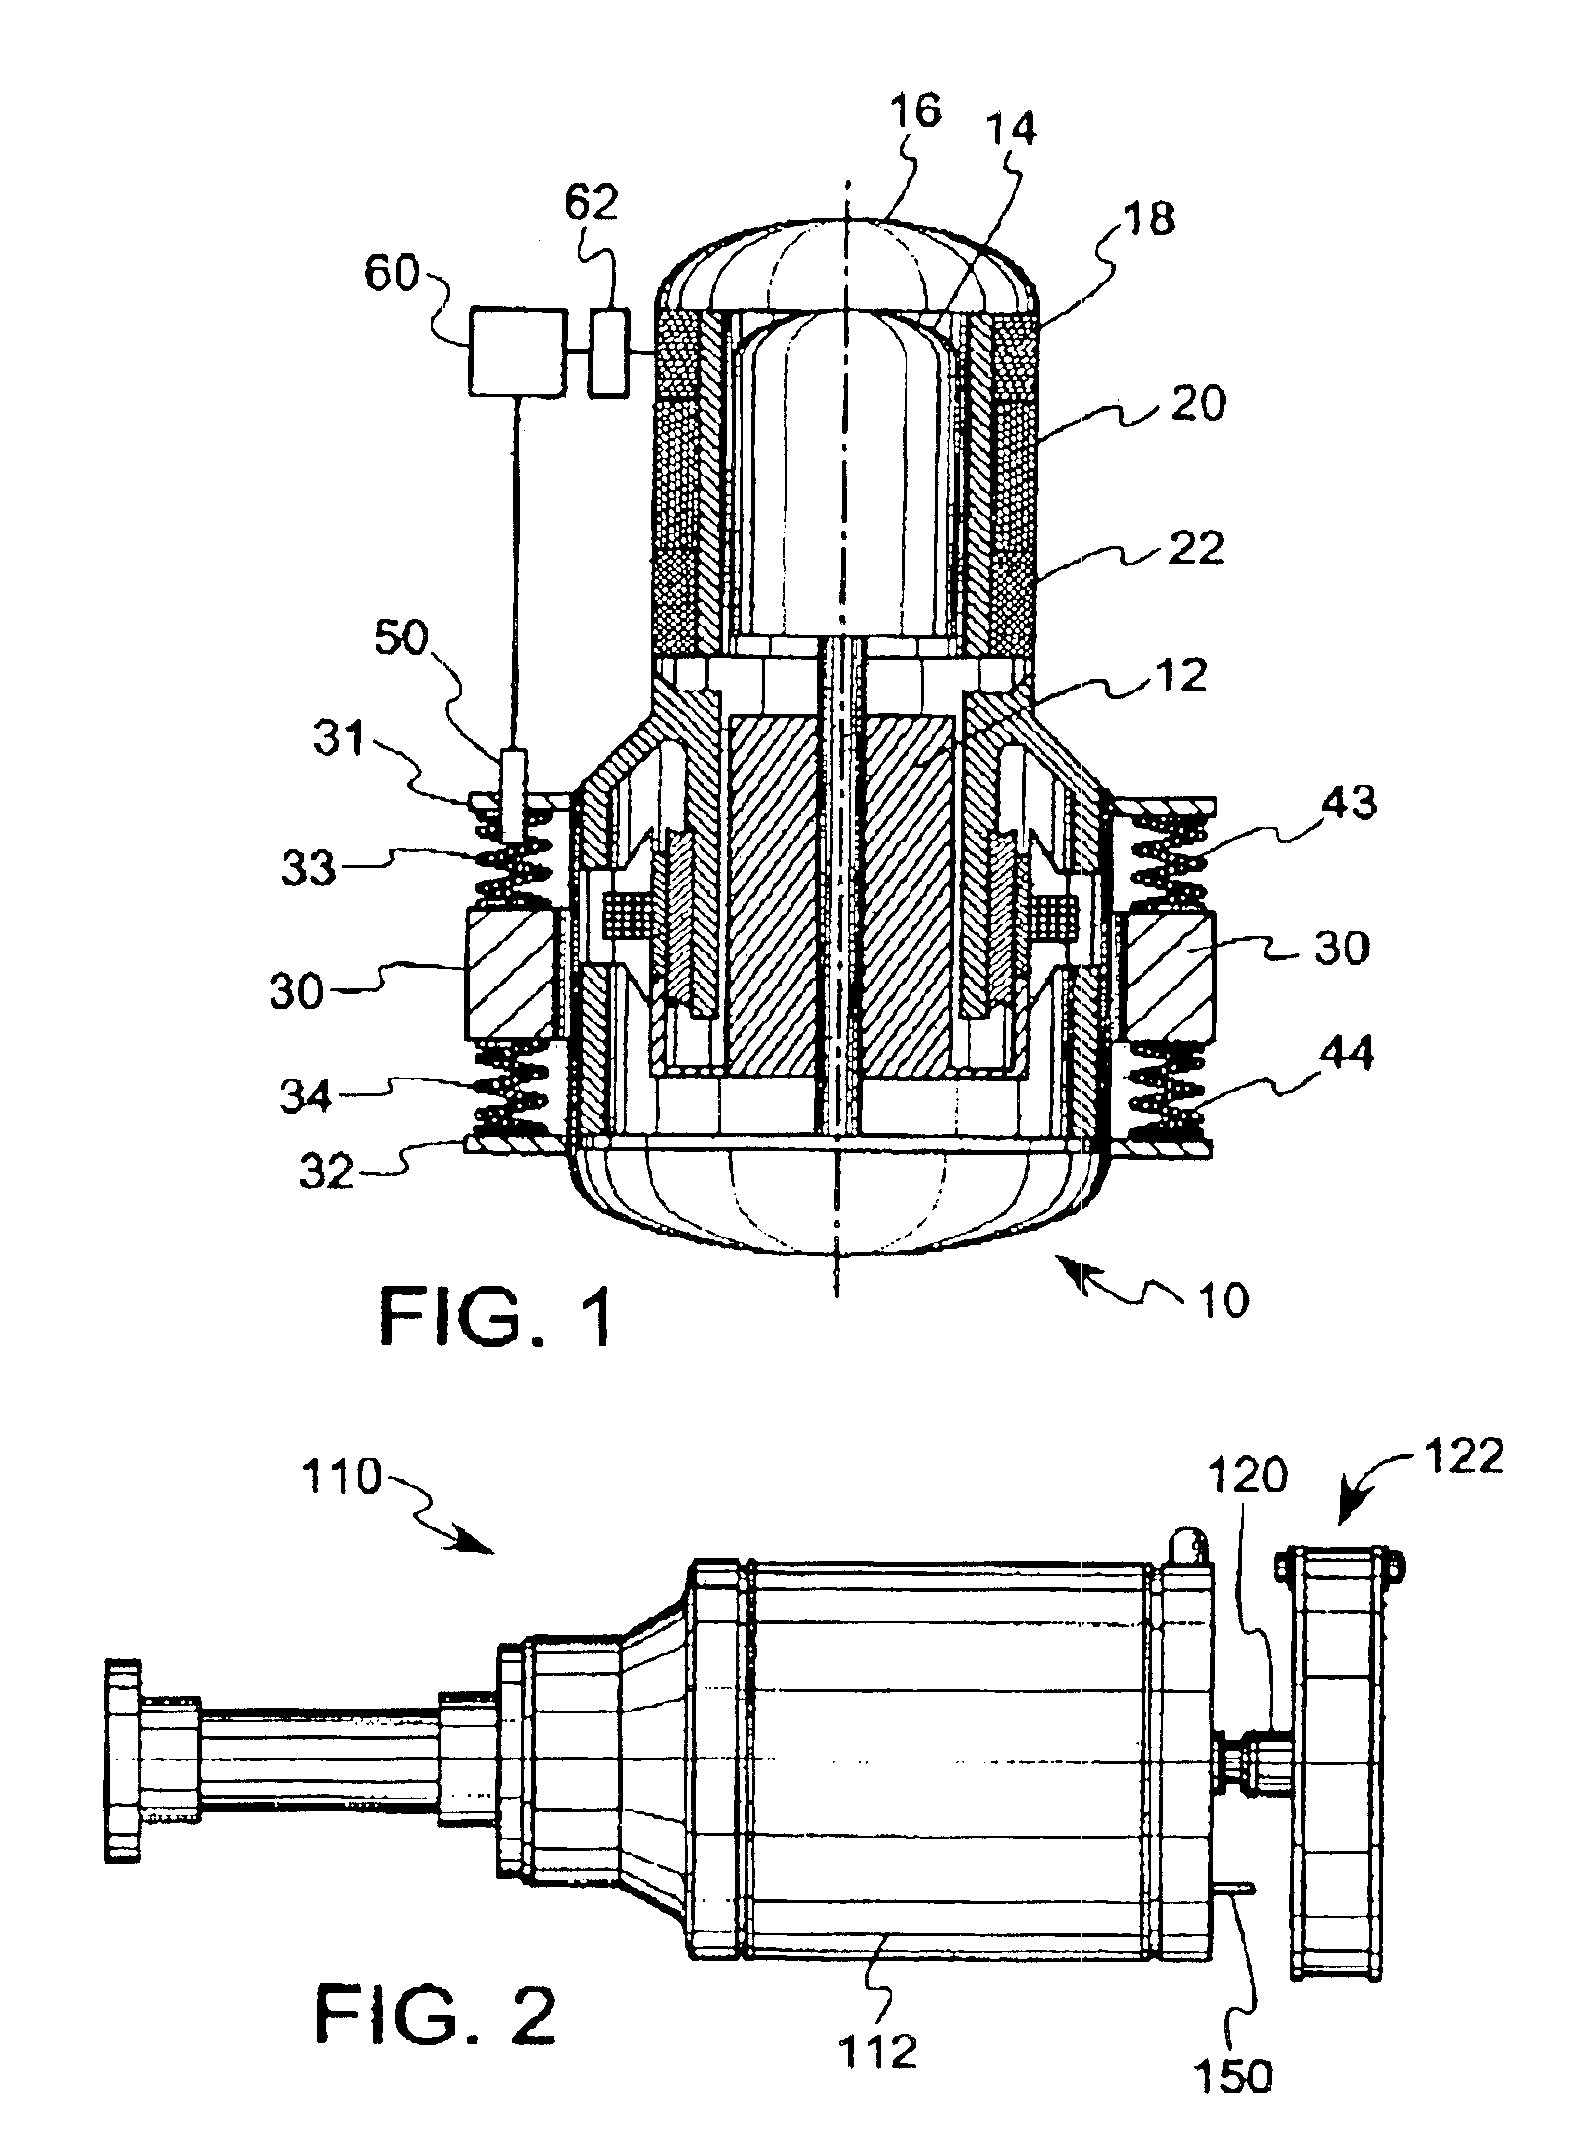 Controller for reducing excessive amplitude of oscillation of free piston